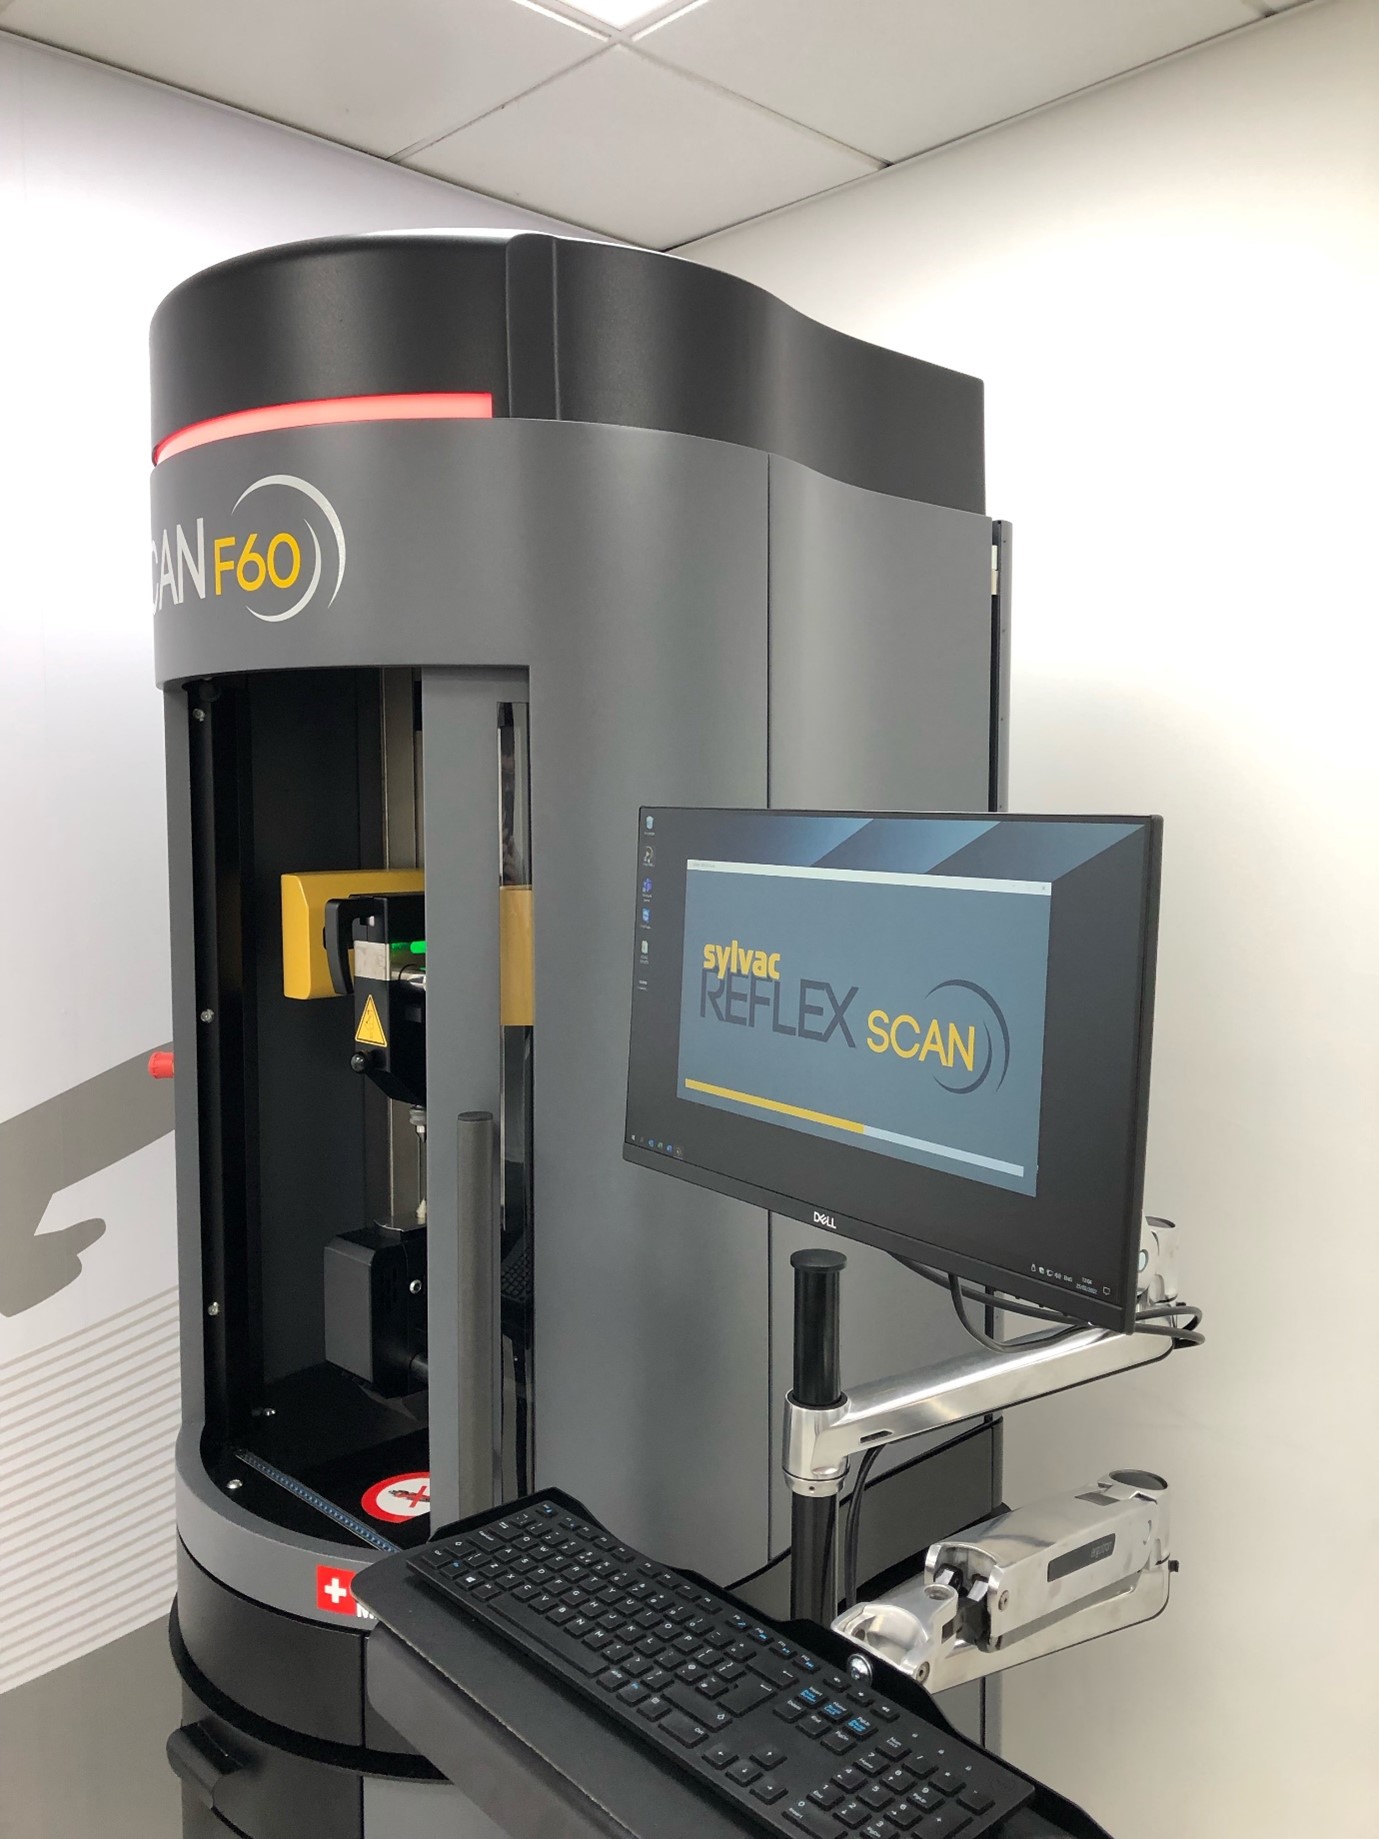 Boneham & Turner Increase Complex Part Offering by Improving Inspection Capability with Sylvac Scan F60L from Bowers Group